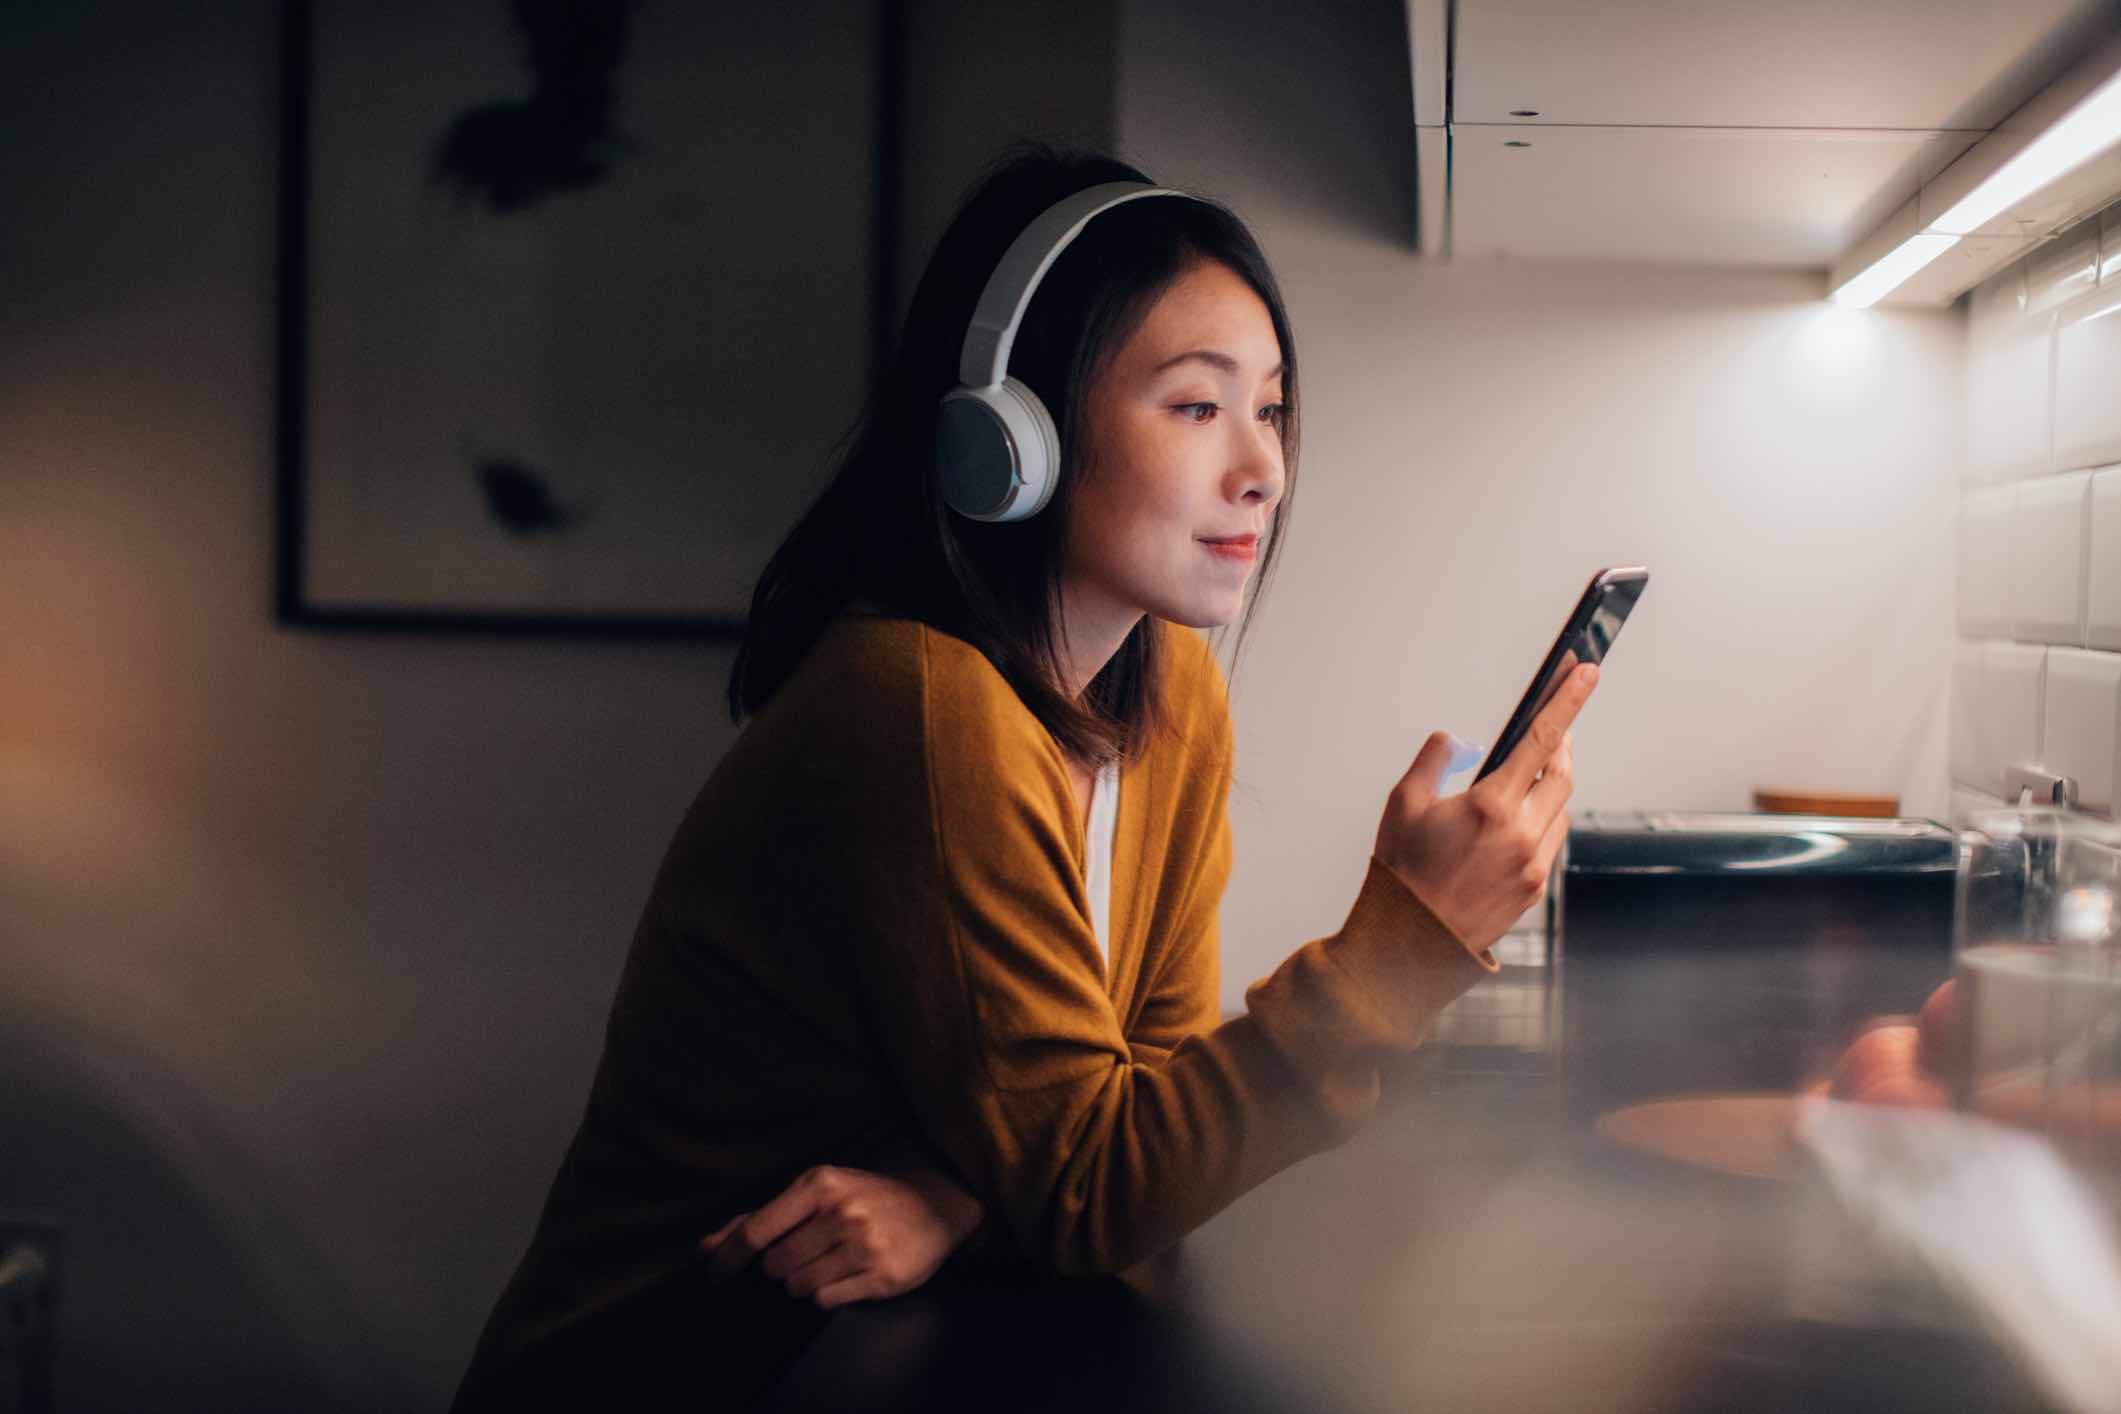 25 Best WordPress Podcasts to Listen To in 2022